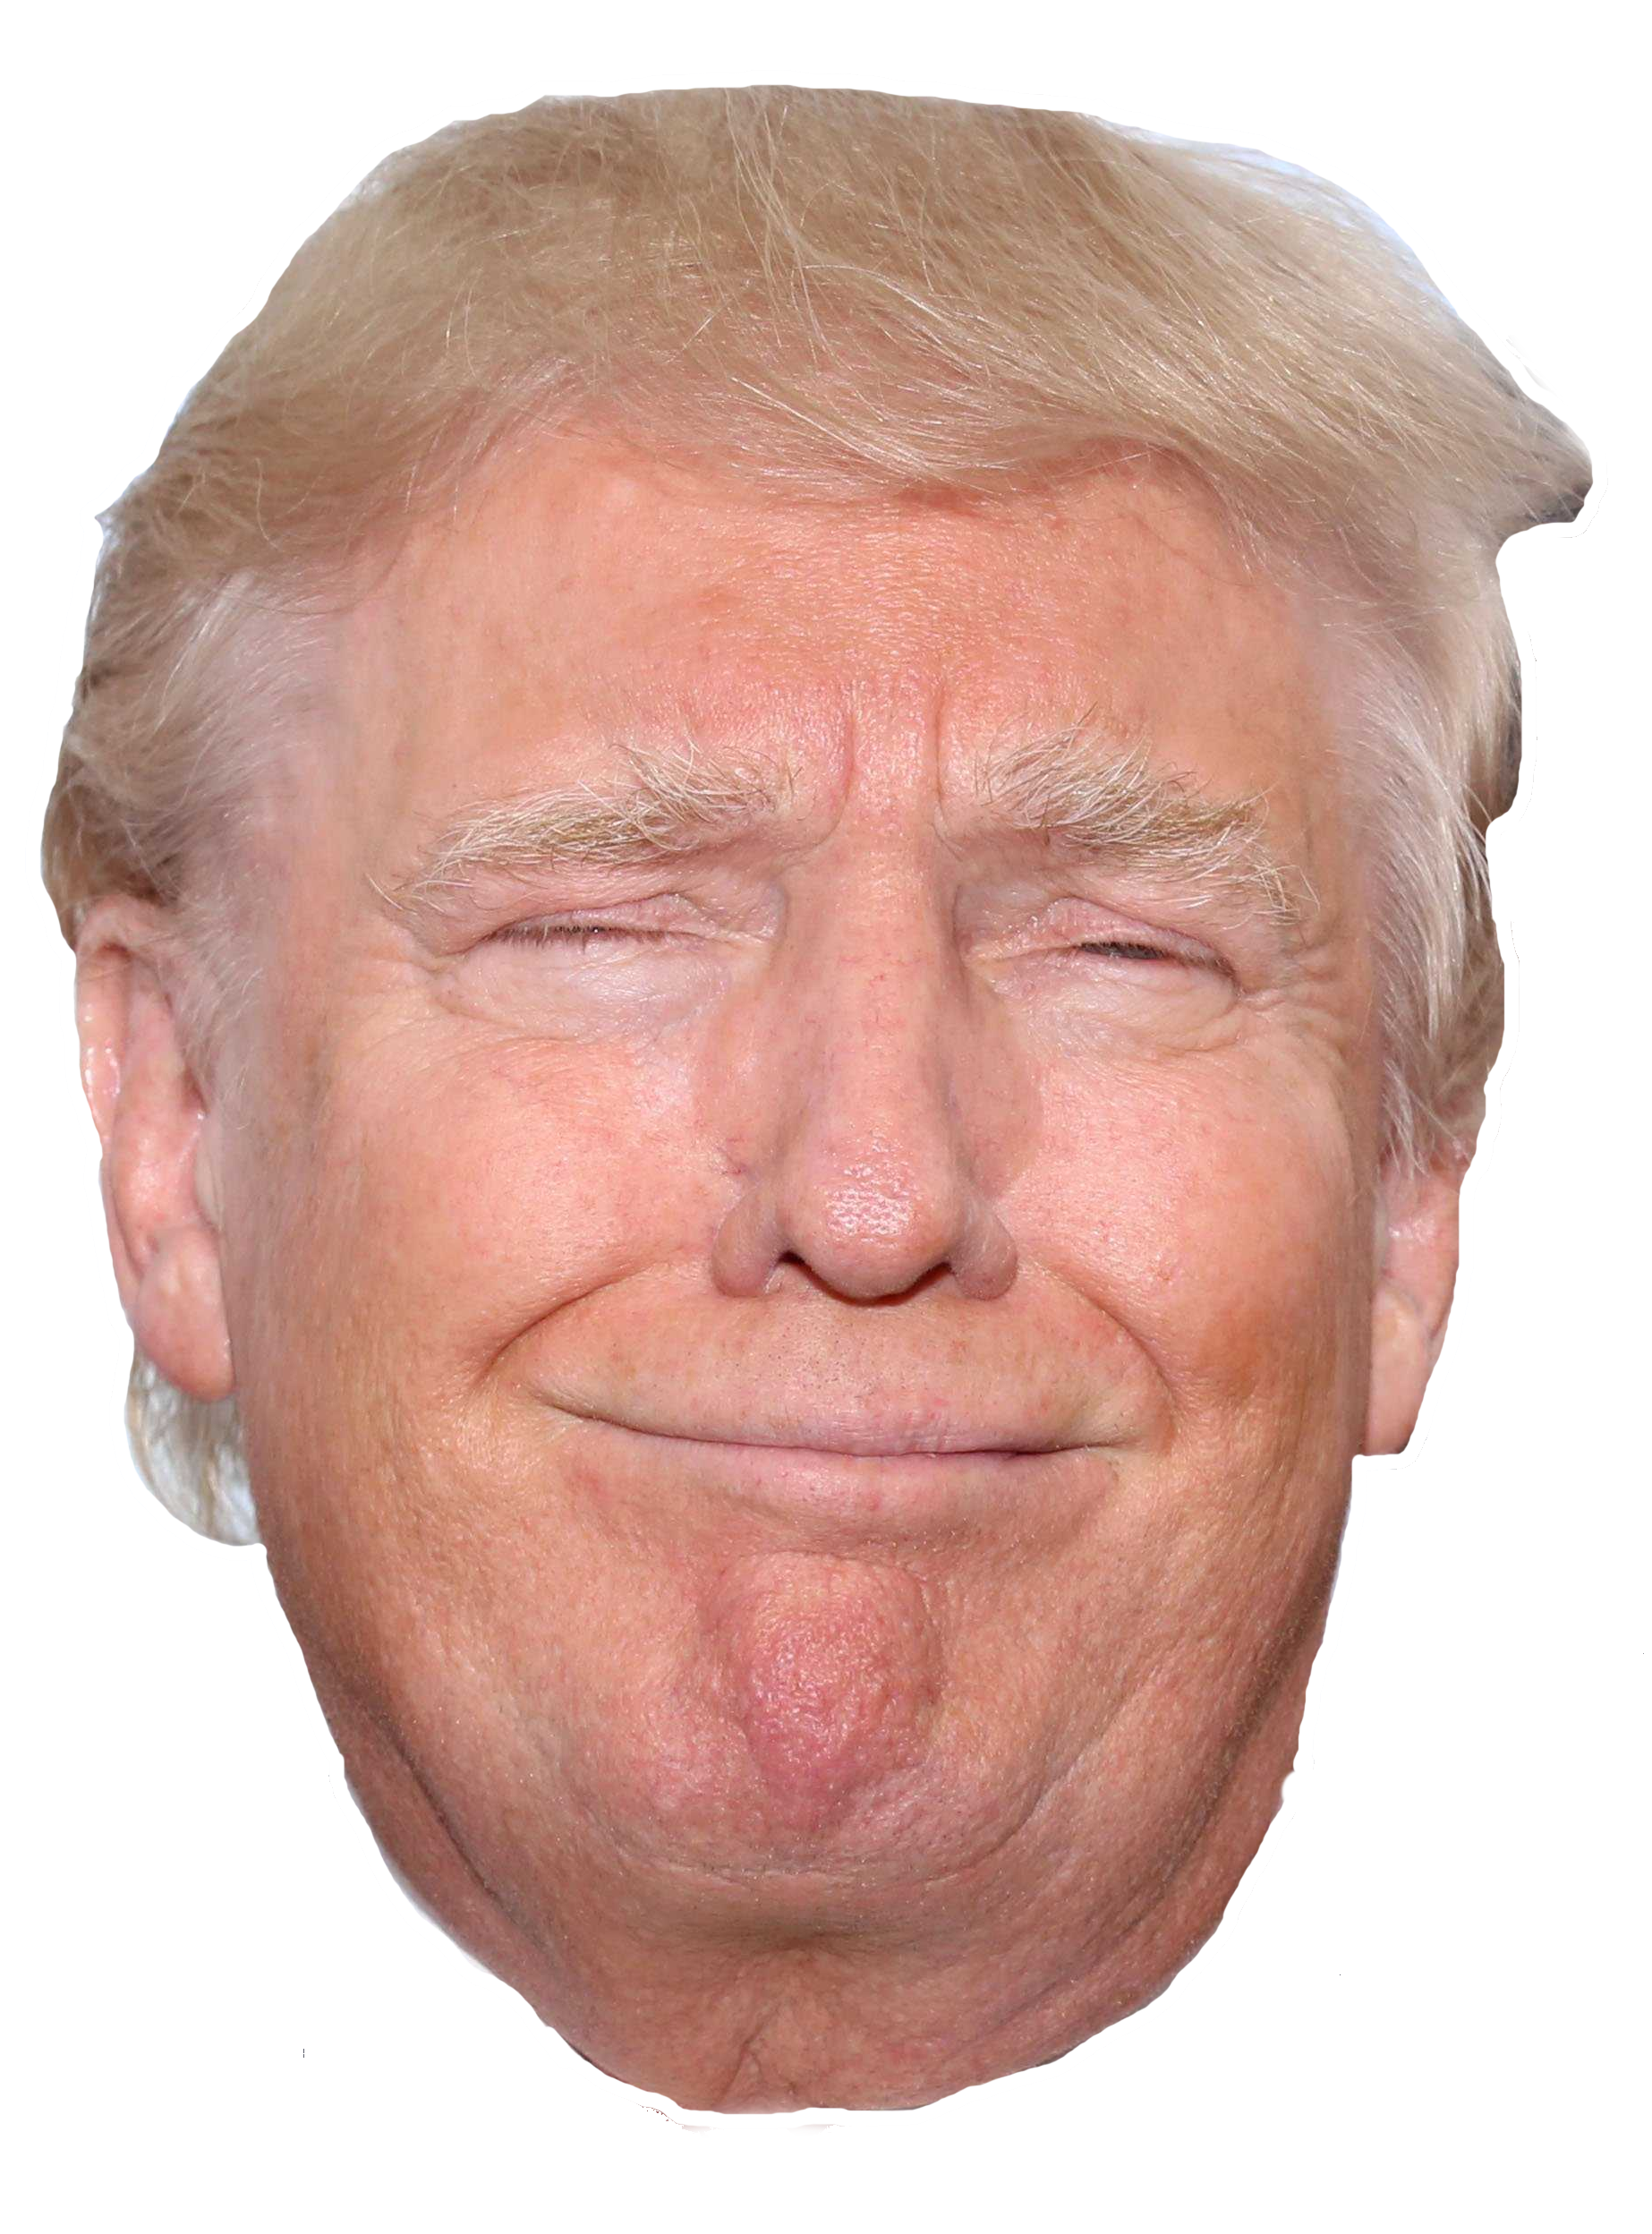 Head United Trump Up States Donald Close PNG Image